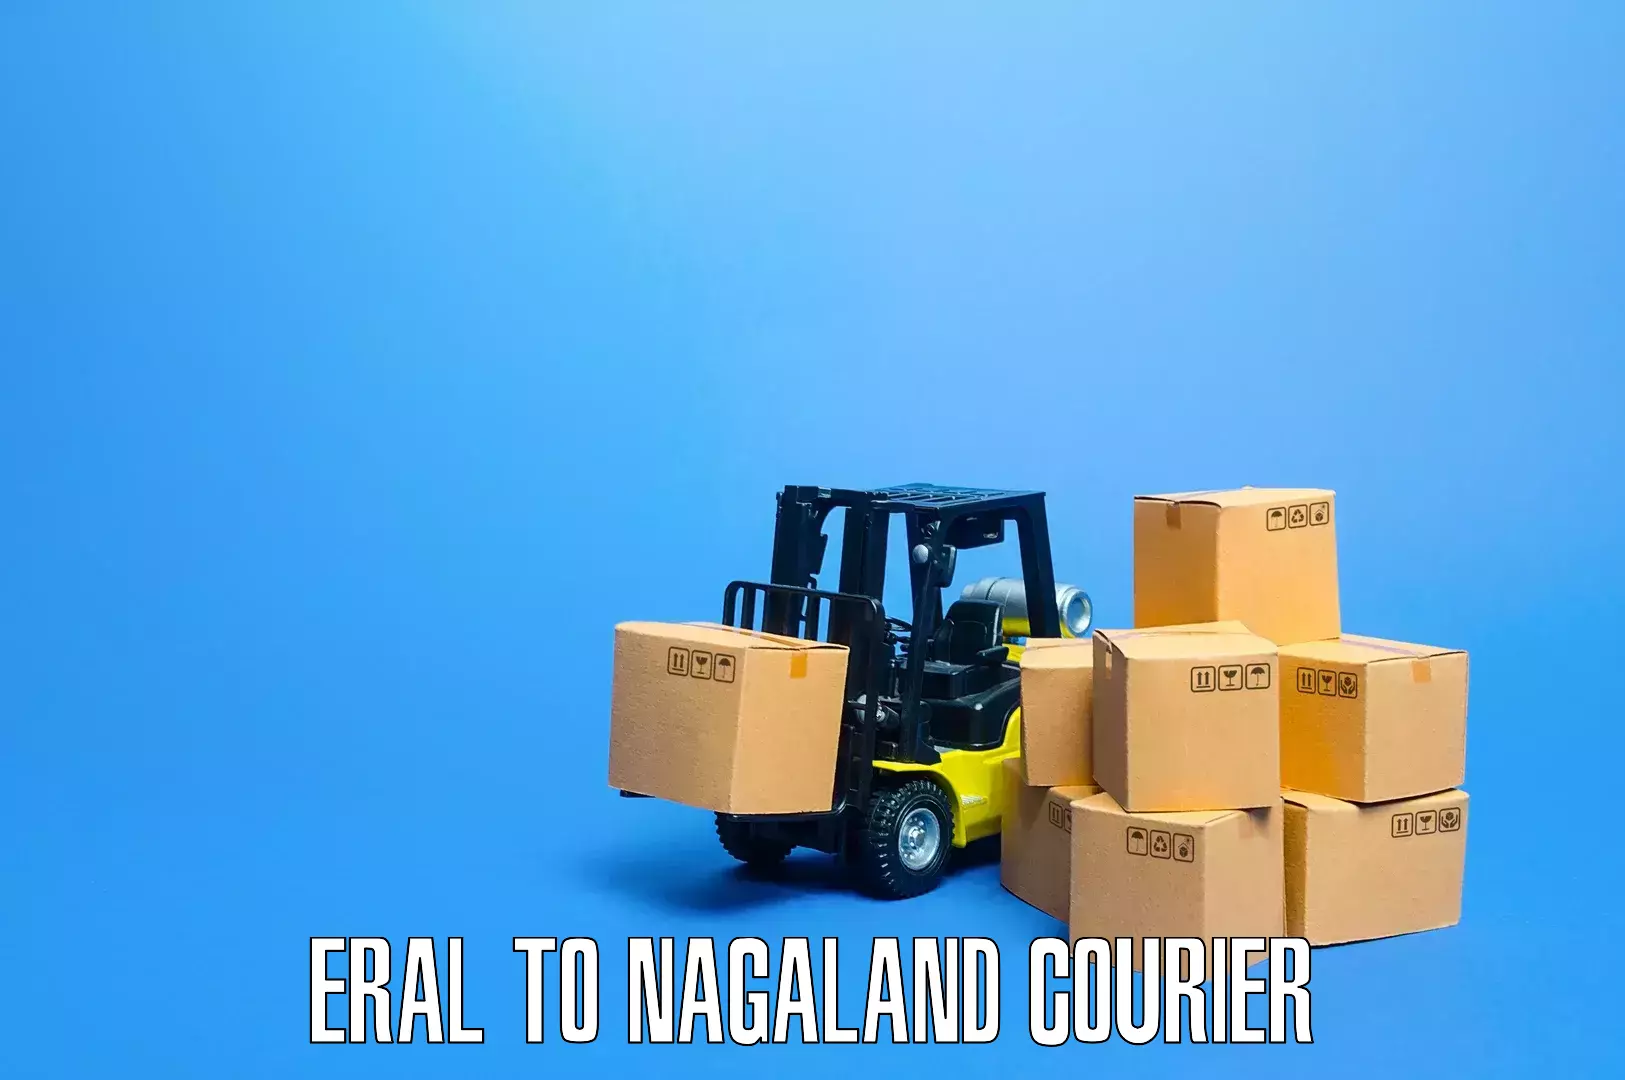 Expert goods movers Eral to Nagaland